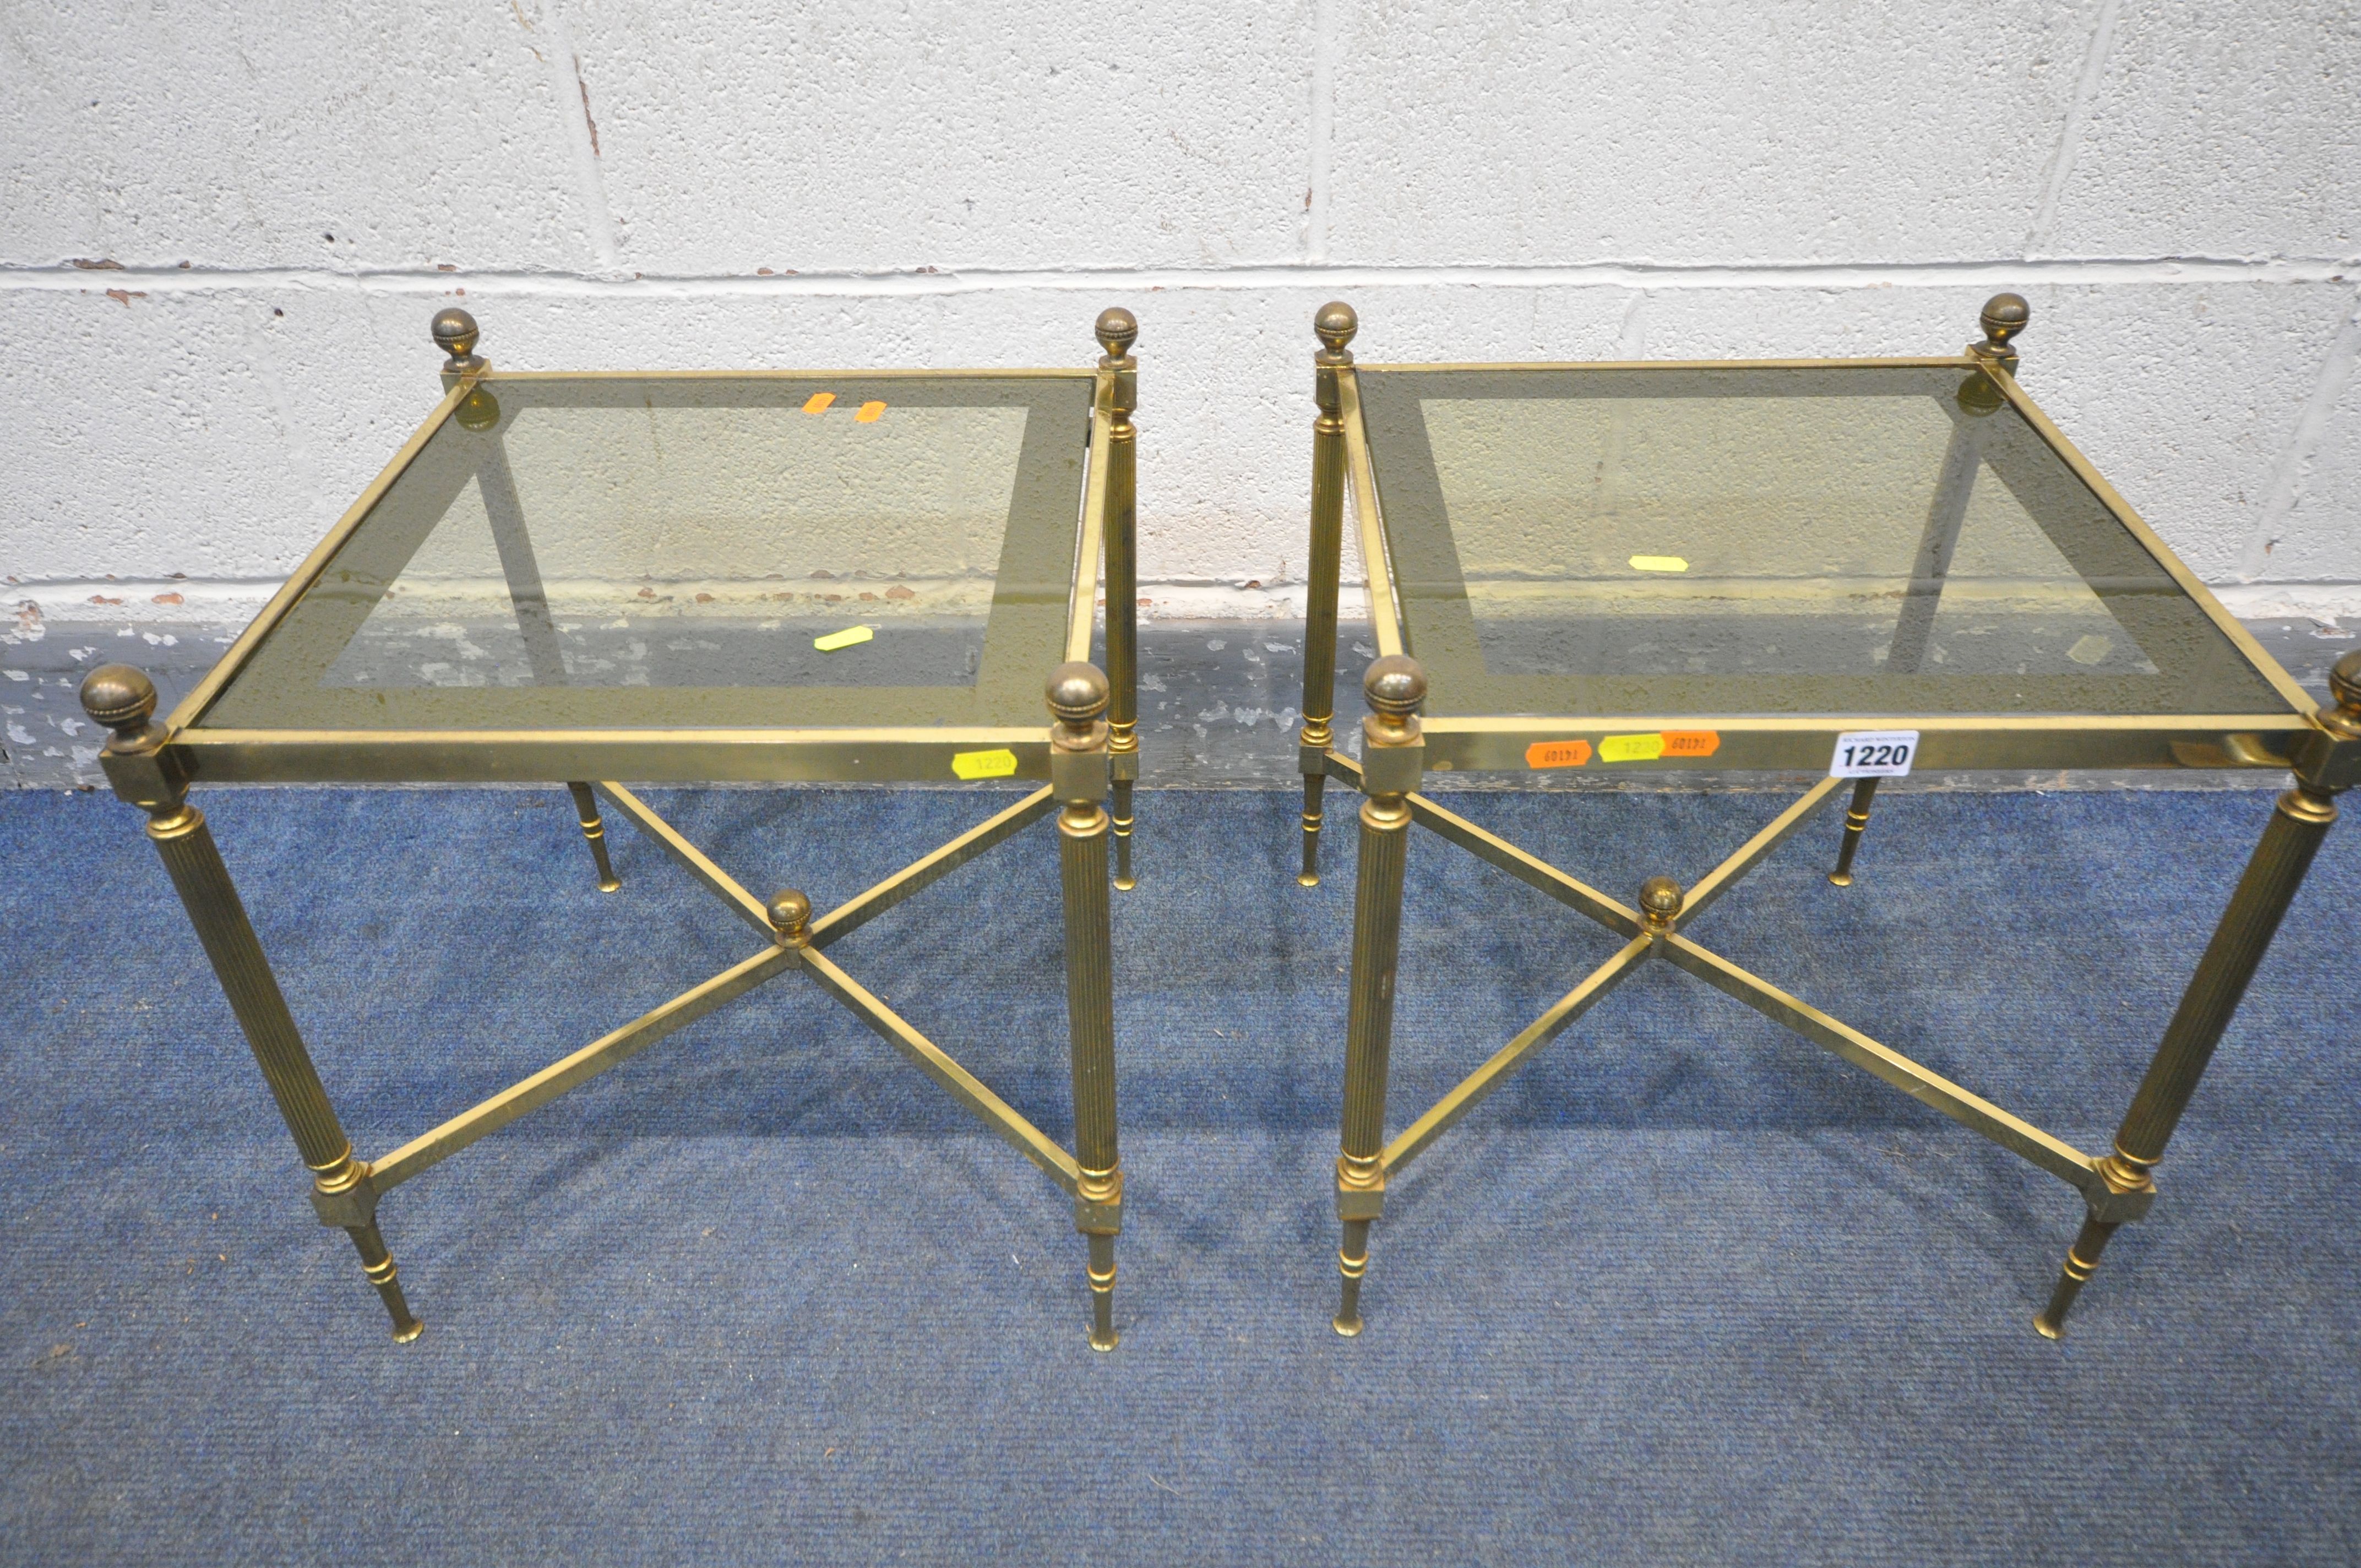 A PAIR OF MAISON JANSEN STYLE FRENCH BRASS SIDE TABLES, with smoked glass inserts, on Corinthian